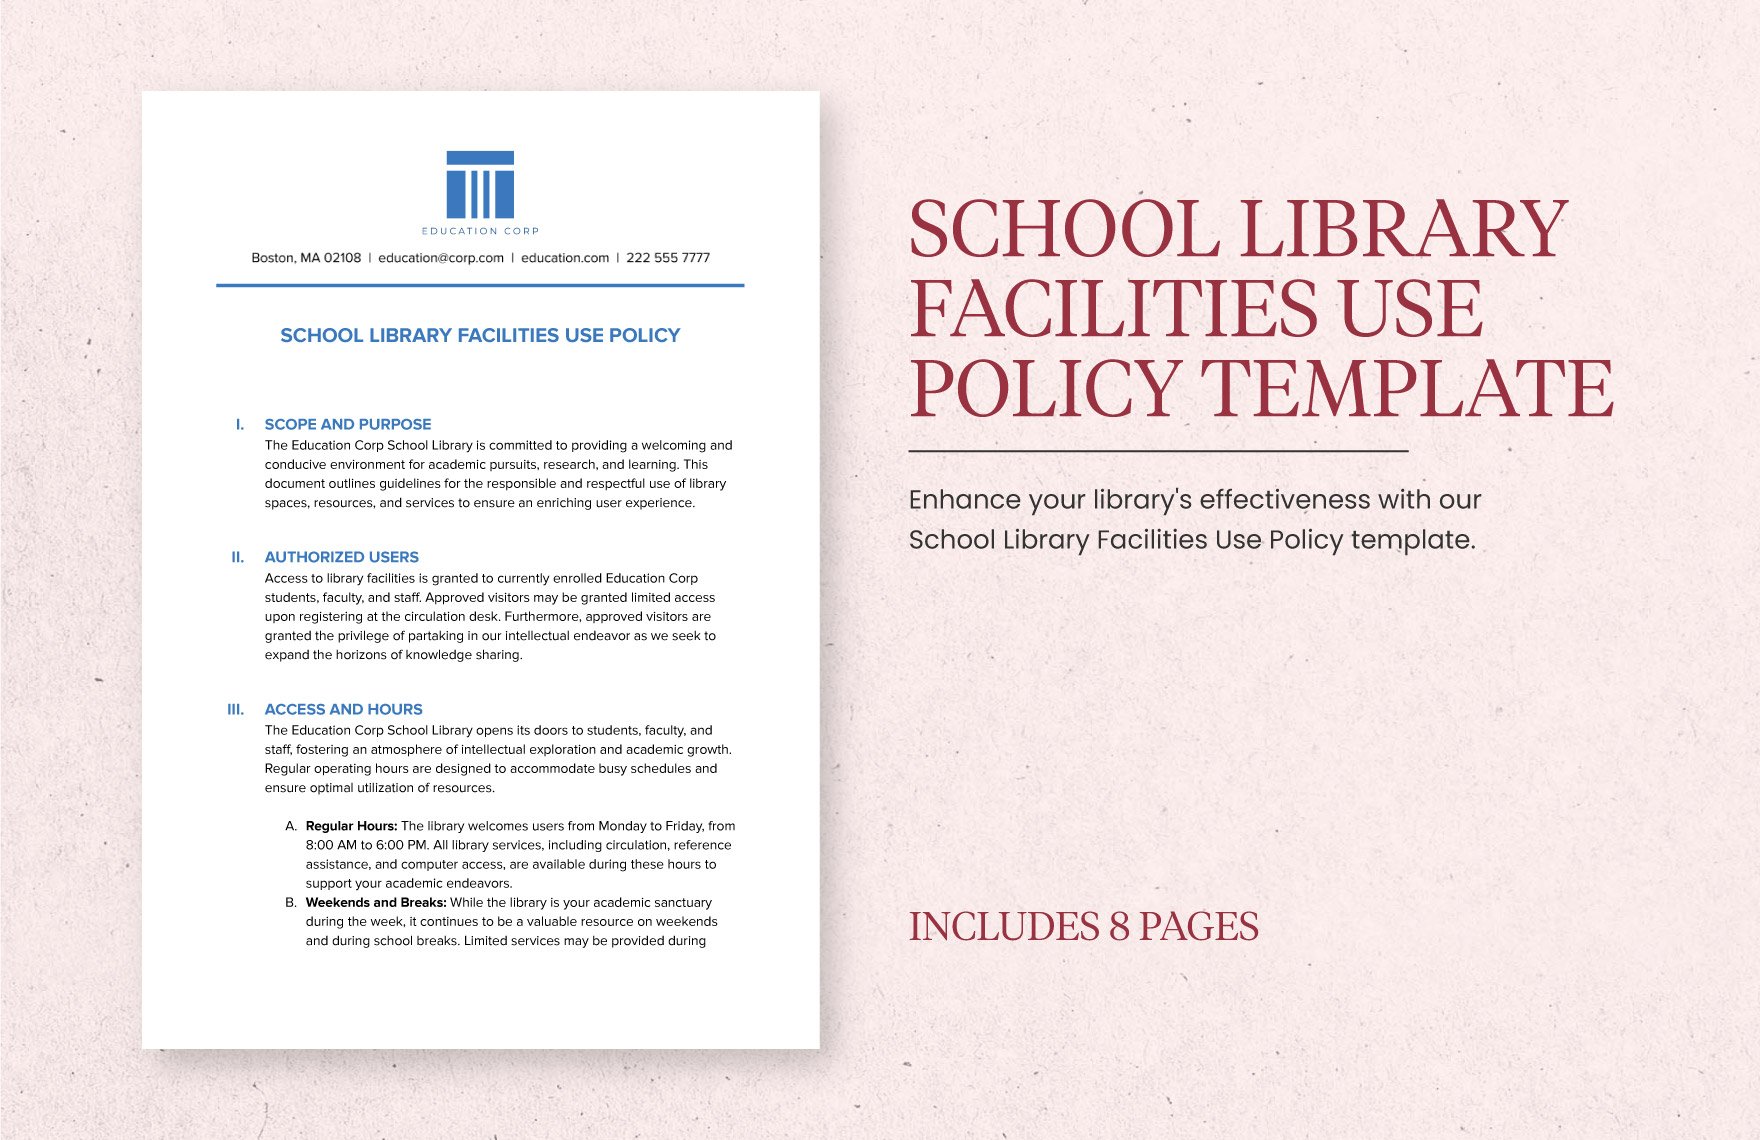 School Library Facilities Use Policy Template